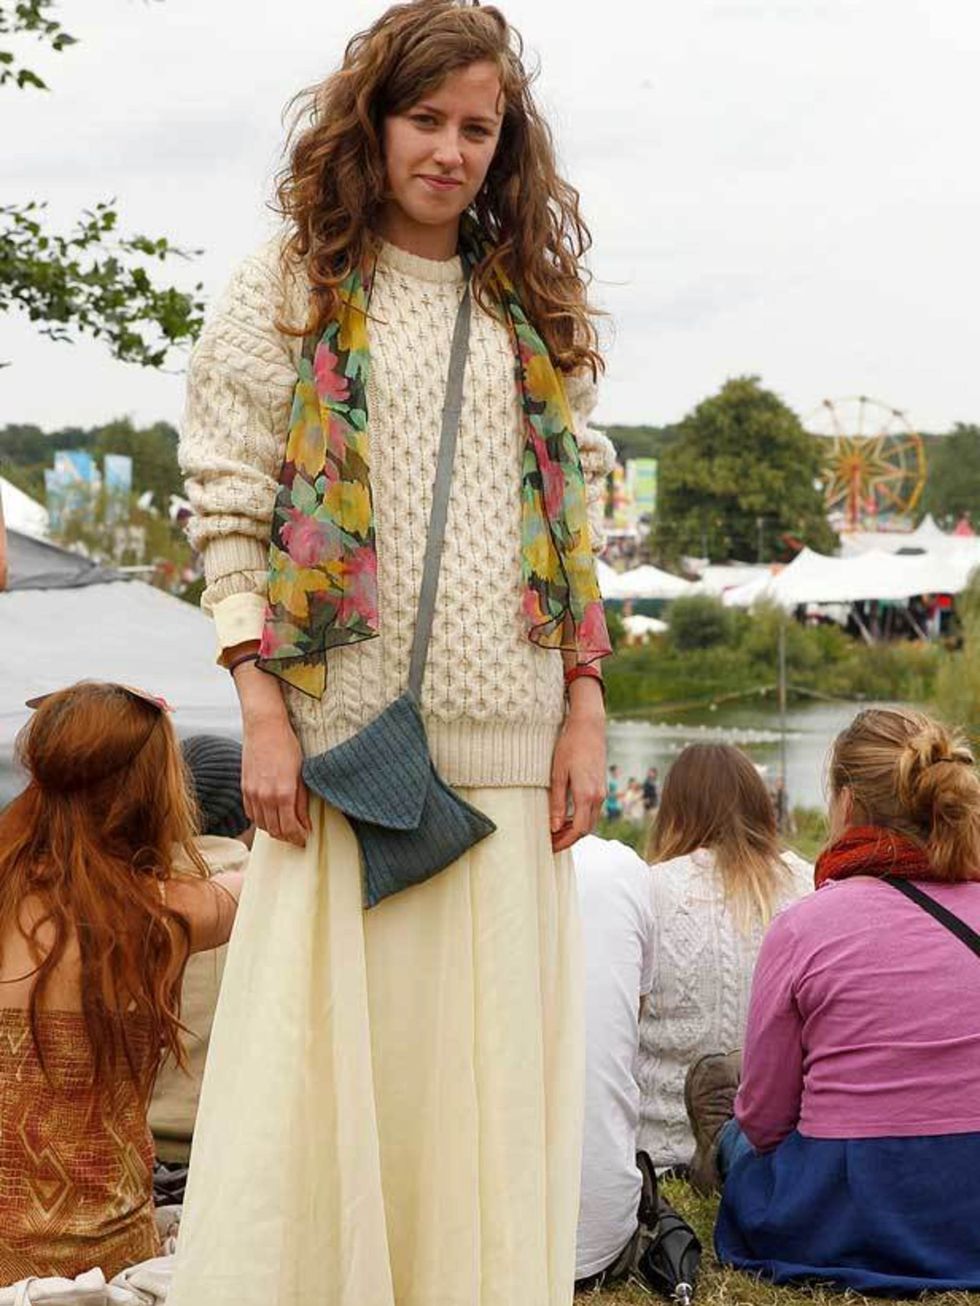 <p>Photo by Anthea Simms.Libby, 23, Publishing. Jumper from charity shop, skirt from New York thrift shop, scarf from Camden, bag from festival.</p>